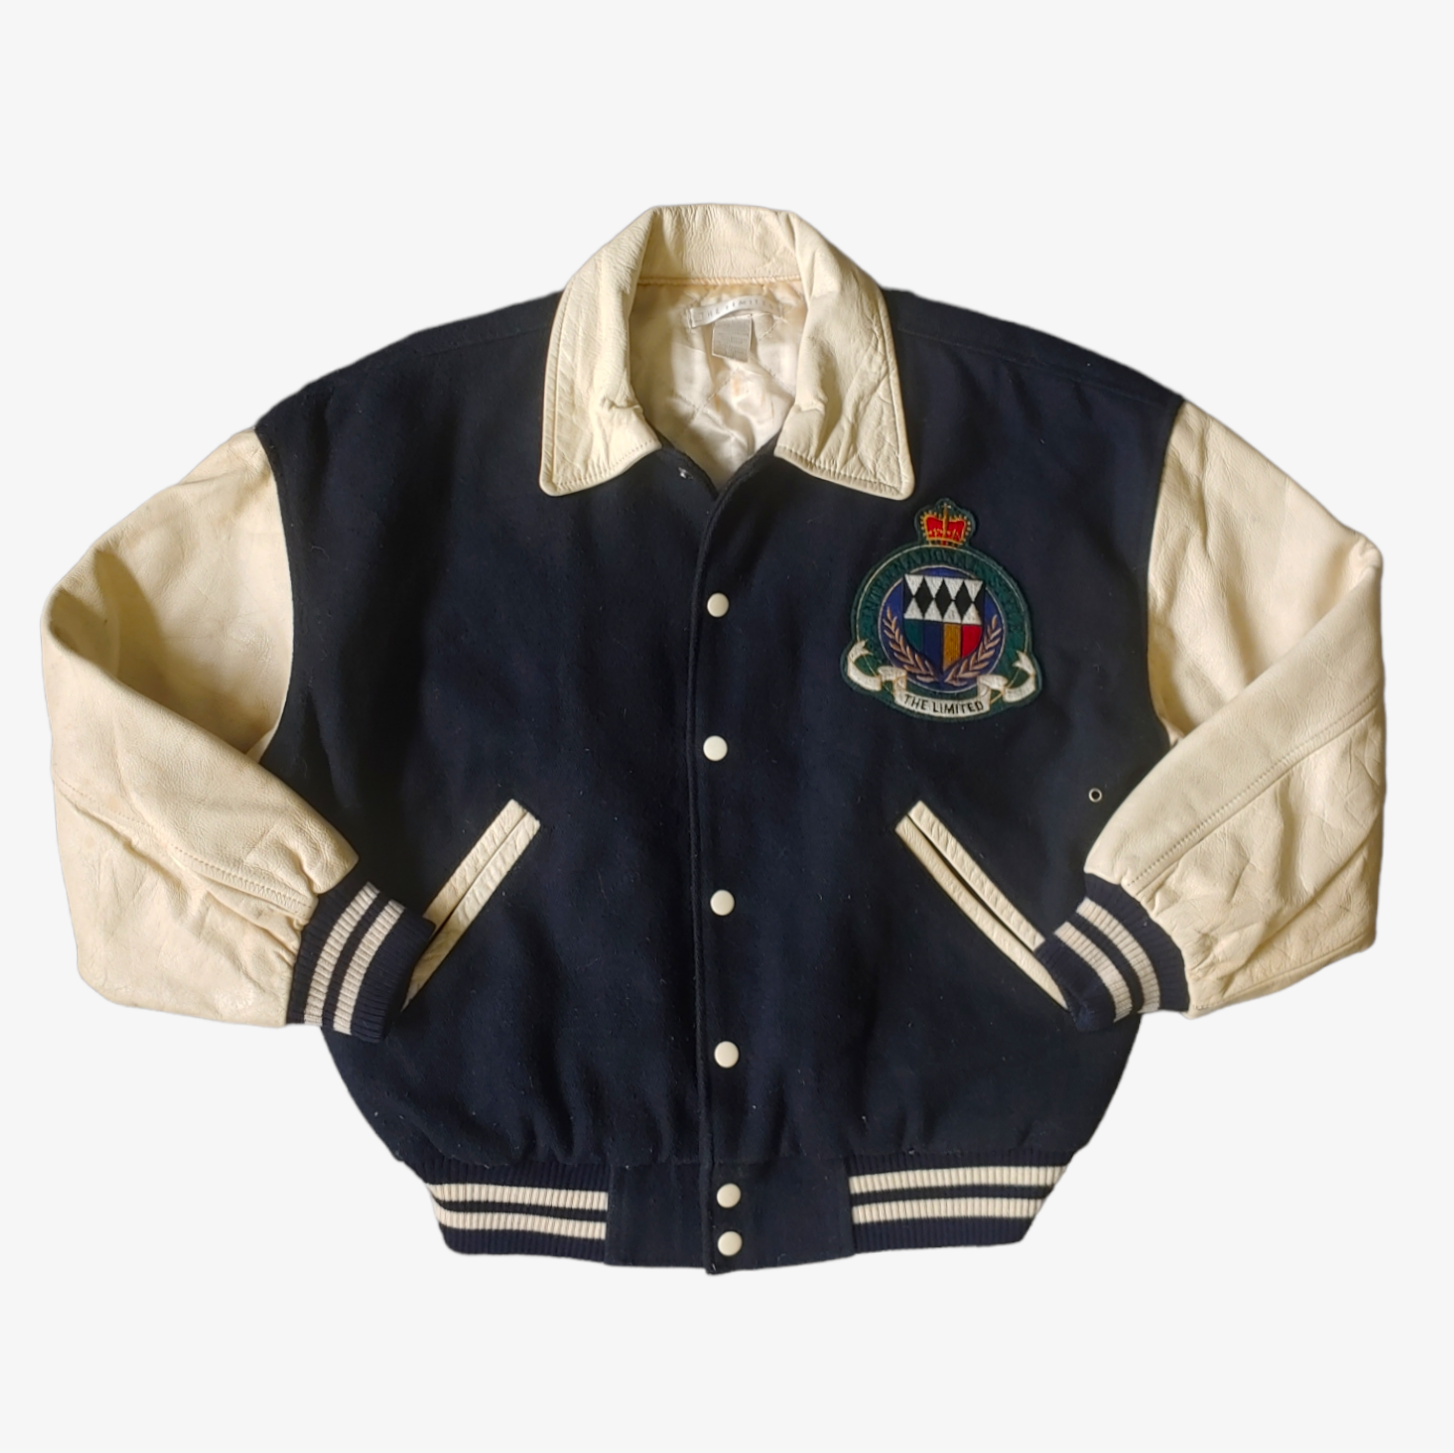 Vintage 90s The Limited International Style World Flags Leather Varsity Jacket - Casspios Dream